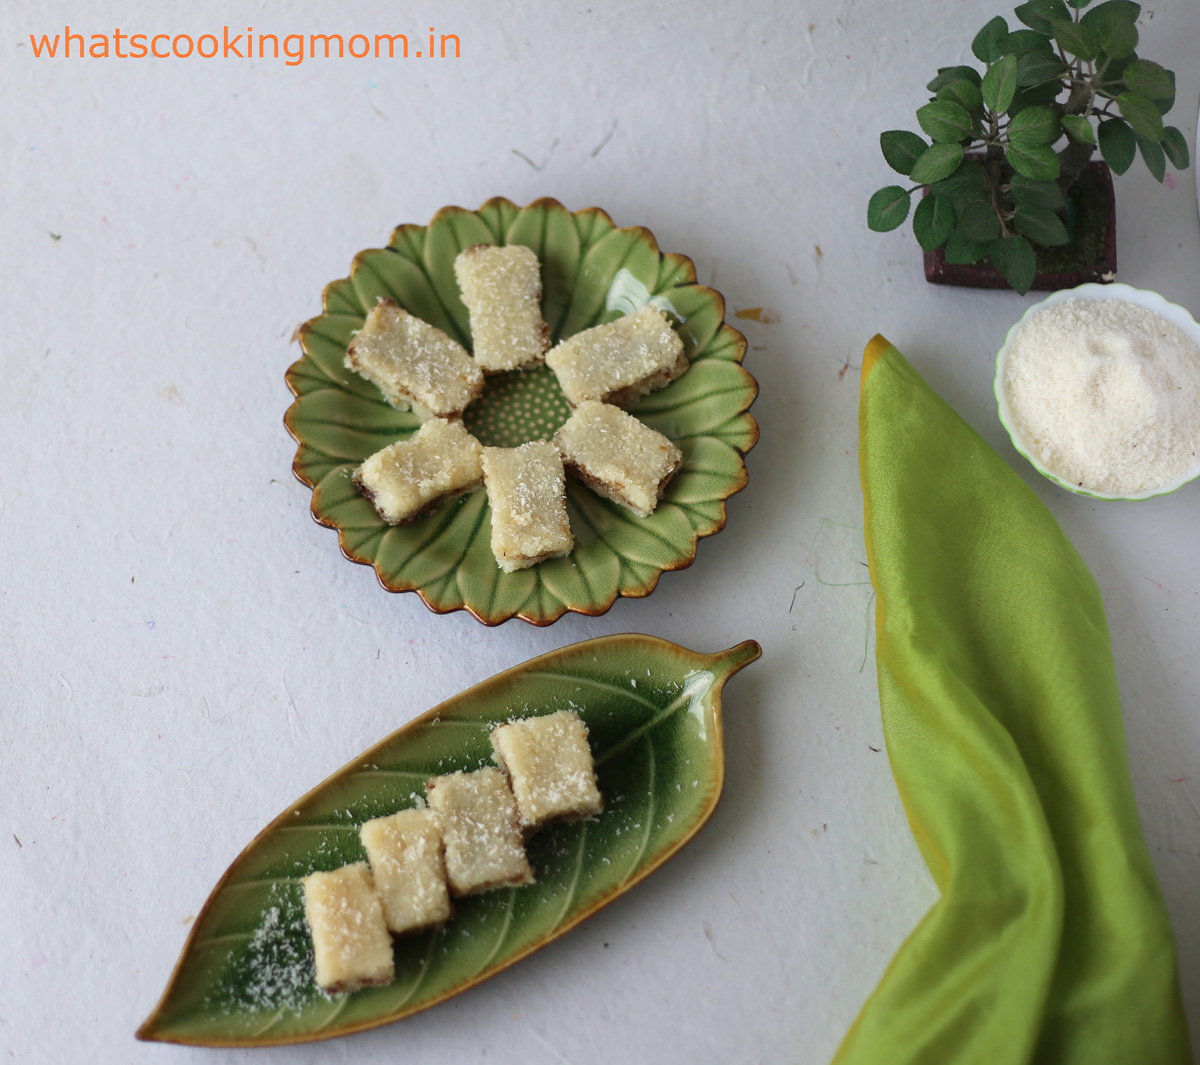 Coconut Burfi with Gulkand - yummy , meli in your mouth #sweet made with #coconut milk #gulkand #indiansweet #eggless